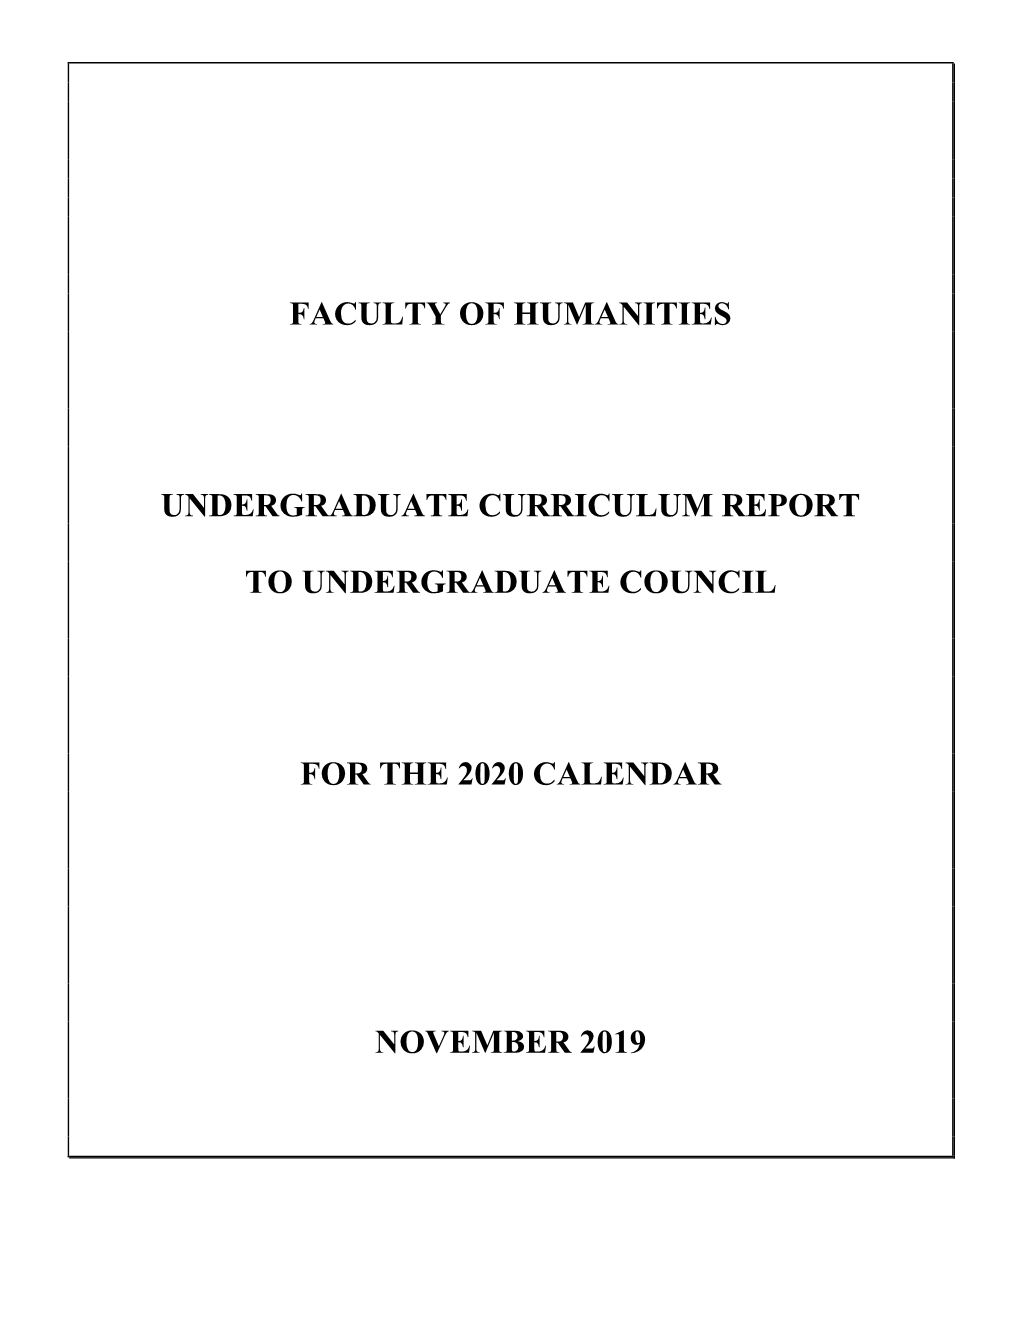 Report from the Undergraduate Curriculum and Calendar Committee